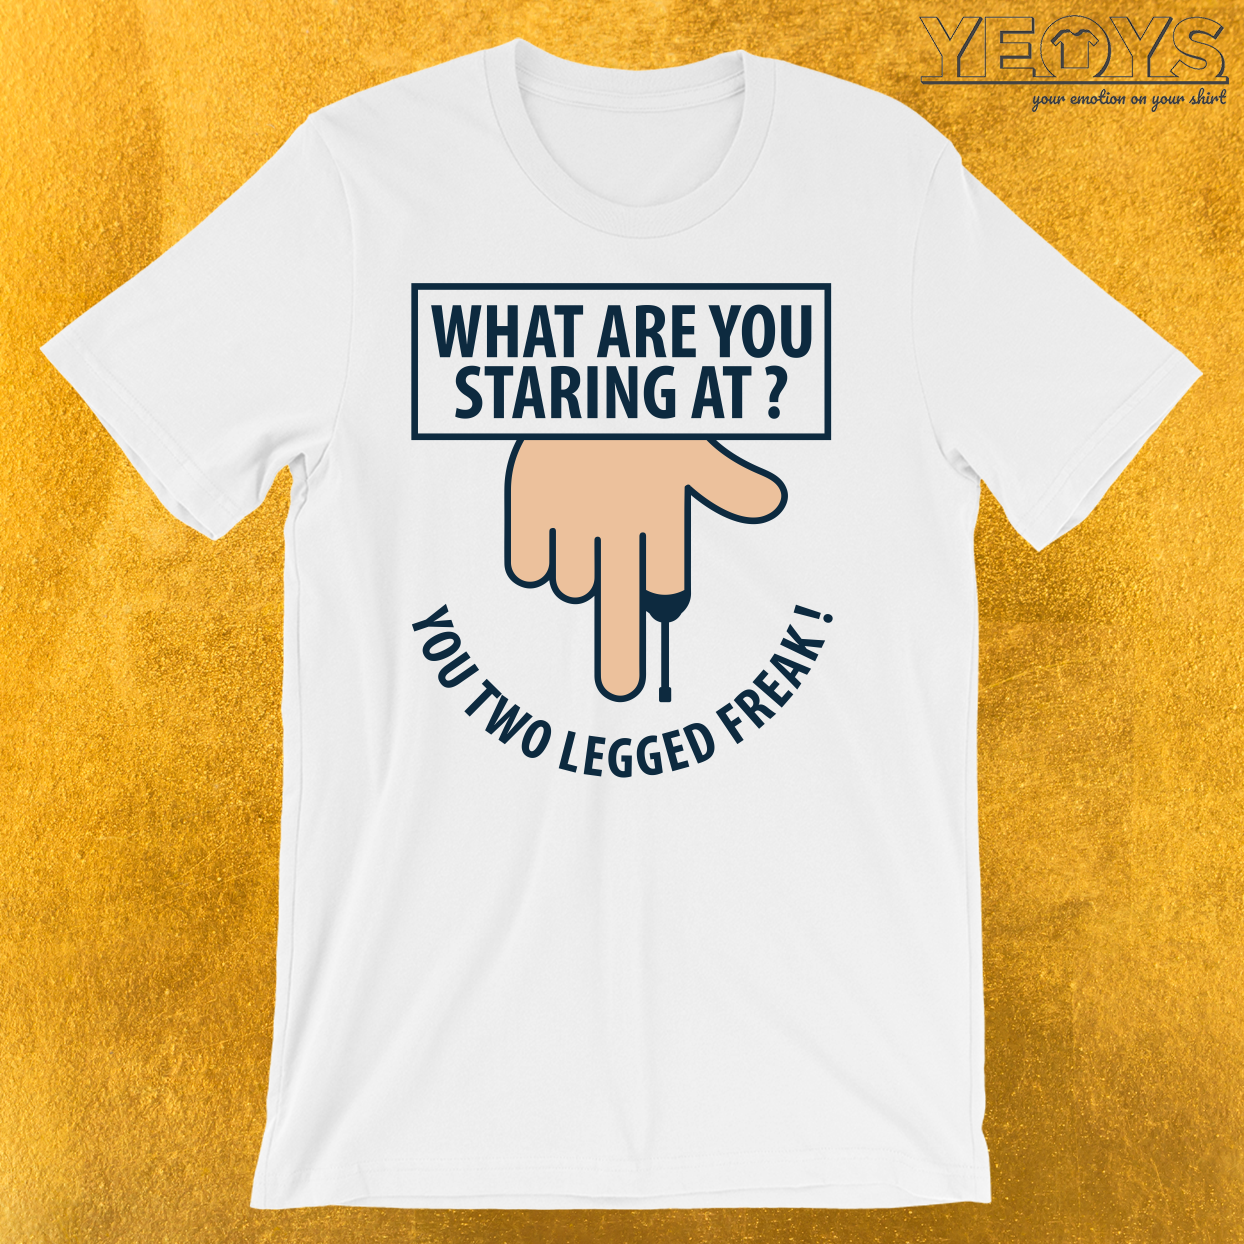 What Are You Staring At You Two Legged Freak T-Shirt